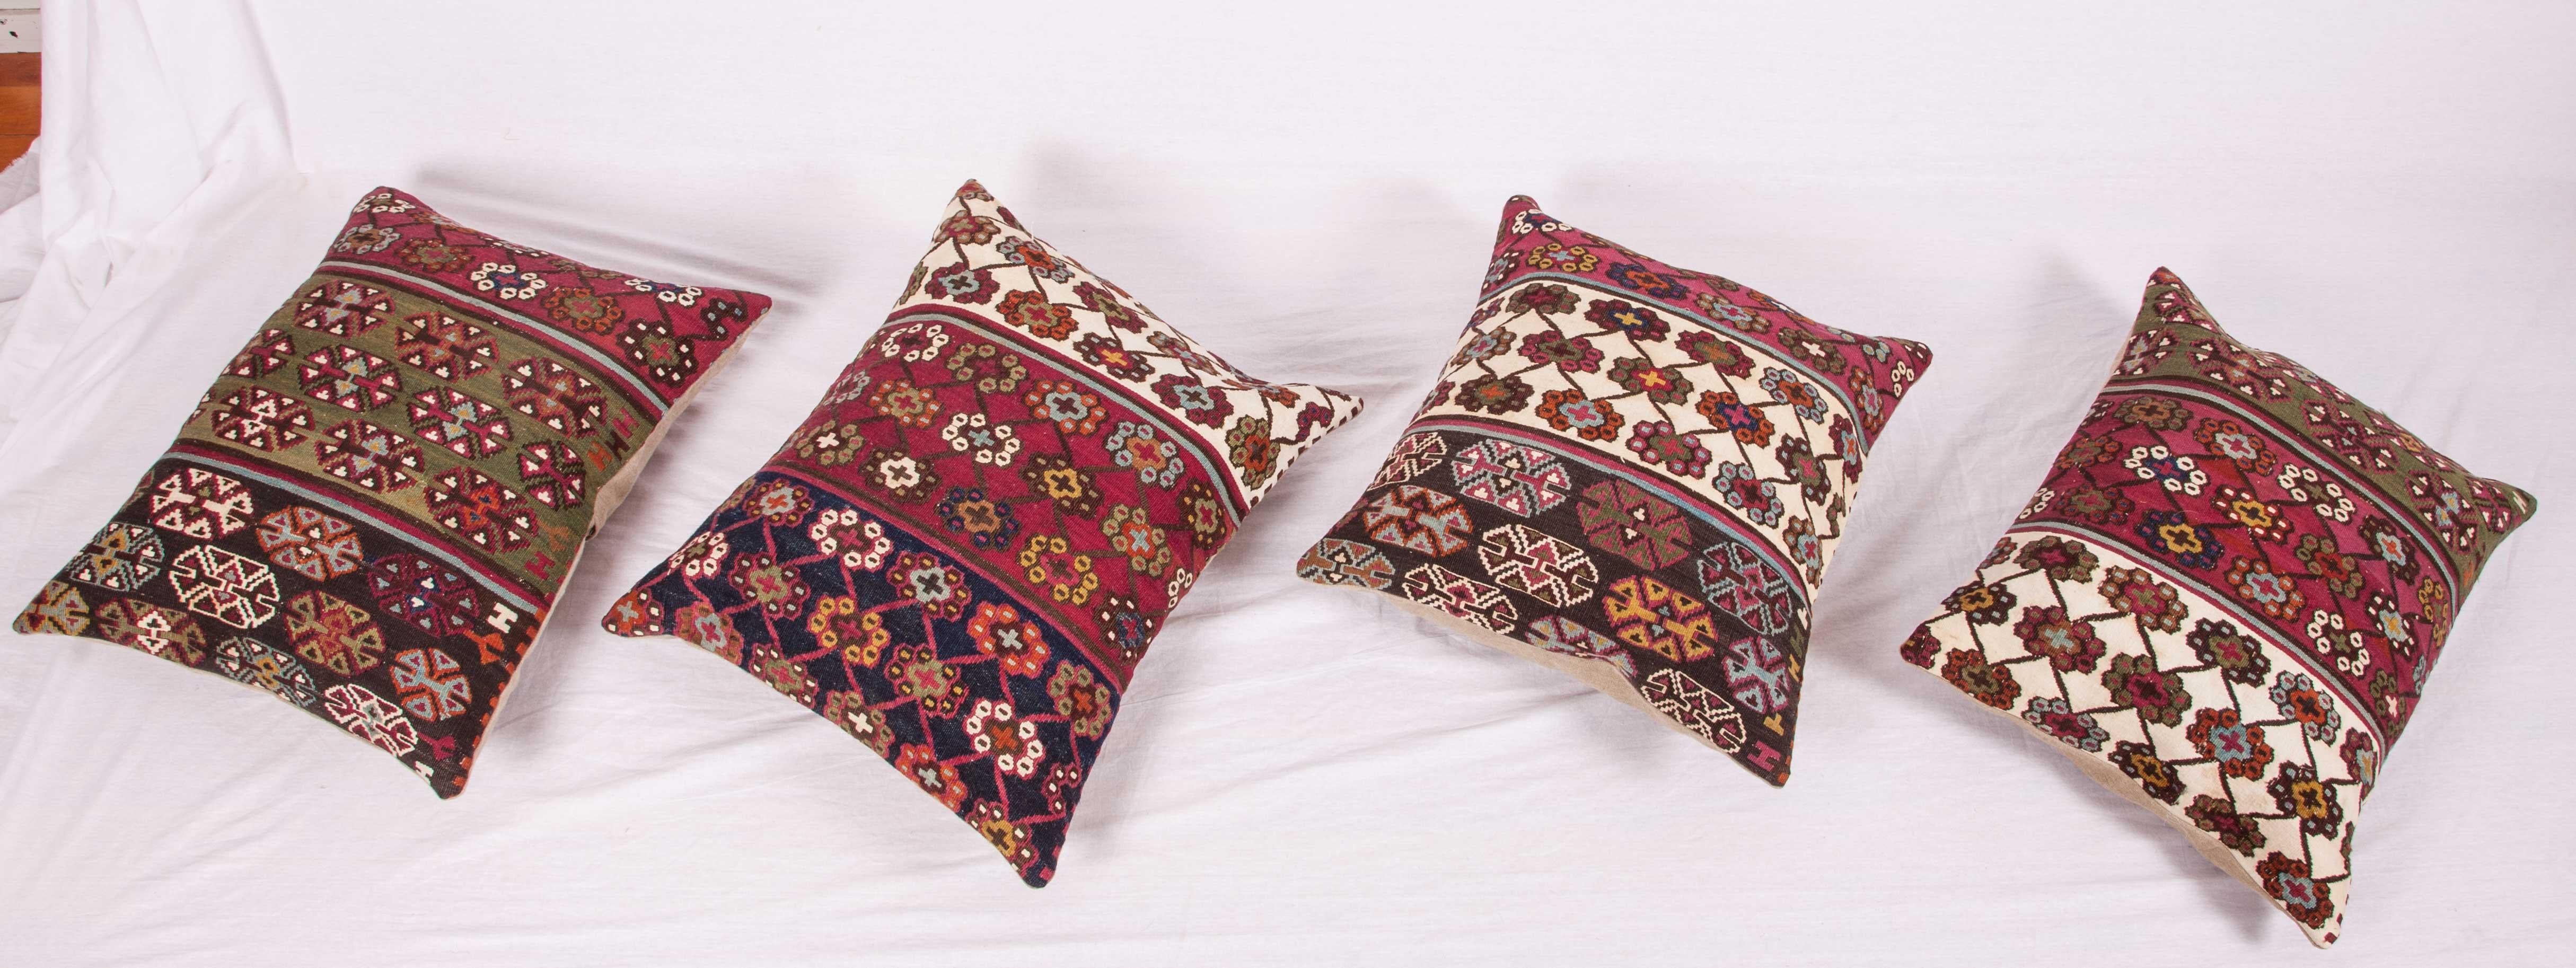 Antique Kilim Cuschion Covers Fashioned from Late 19th Century Turkish Kilim 6